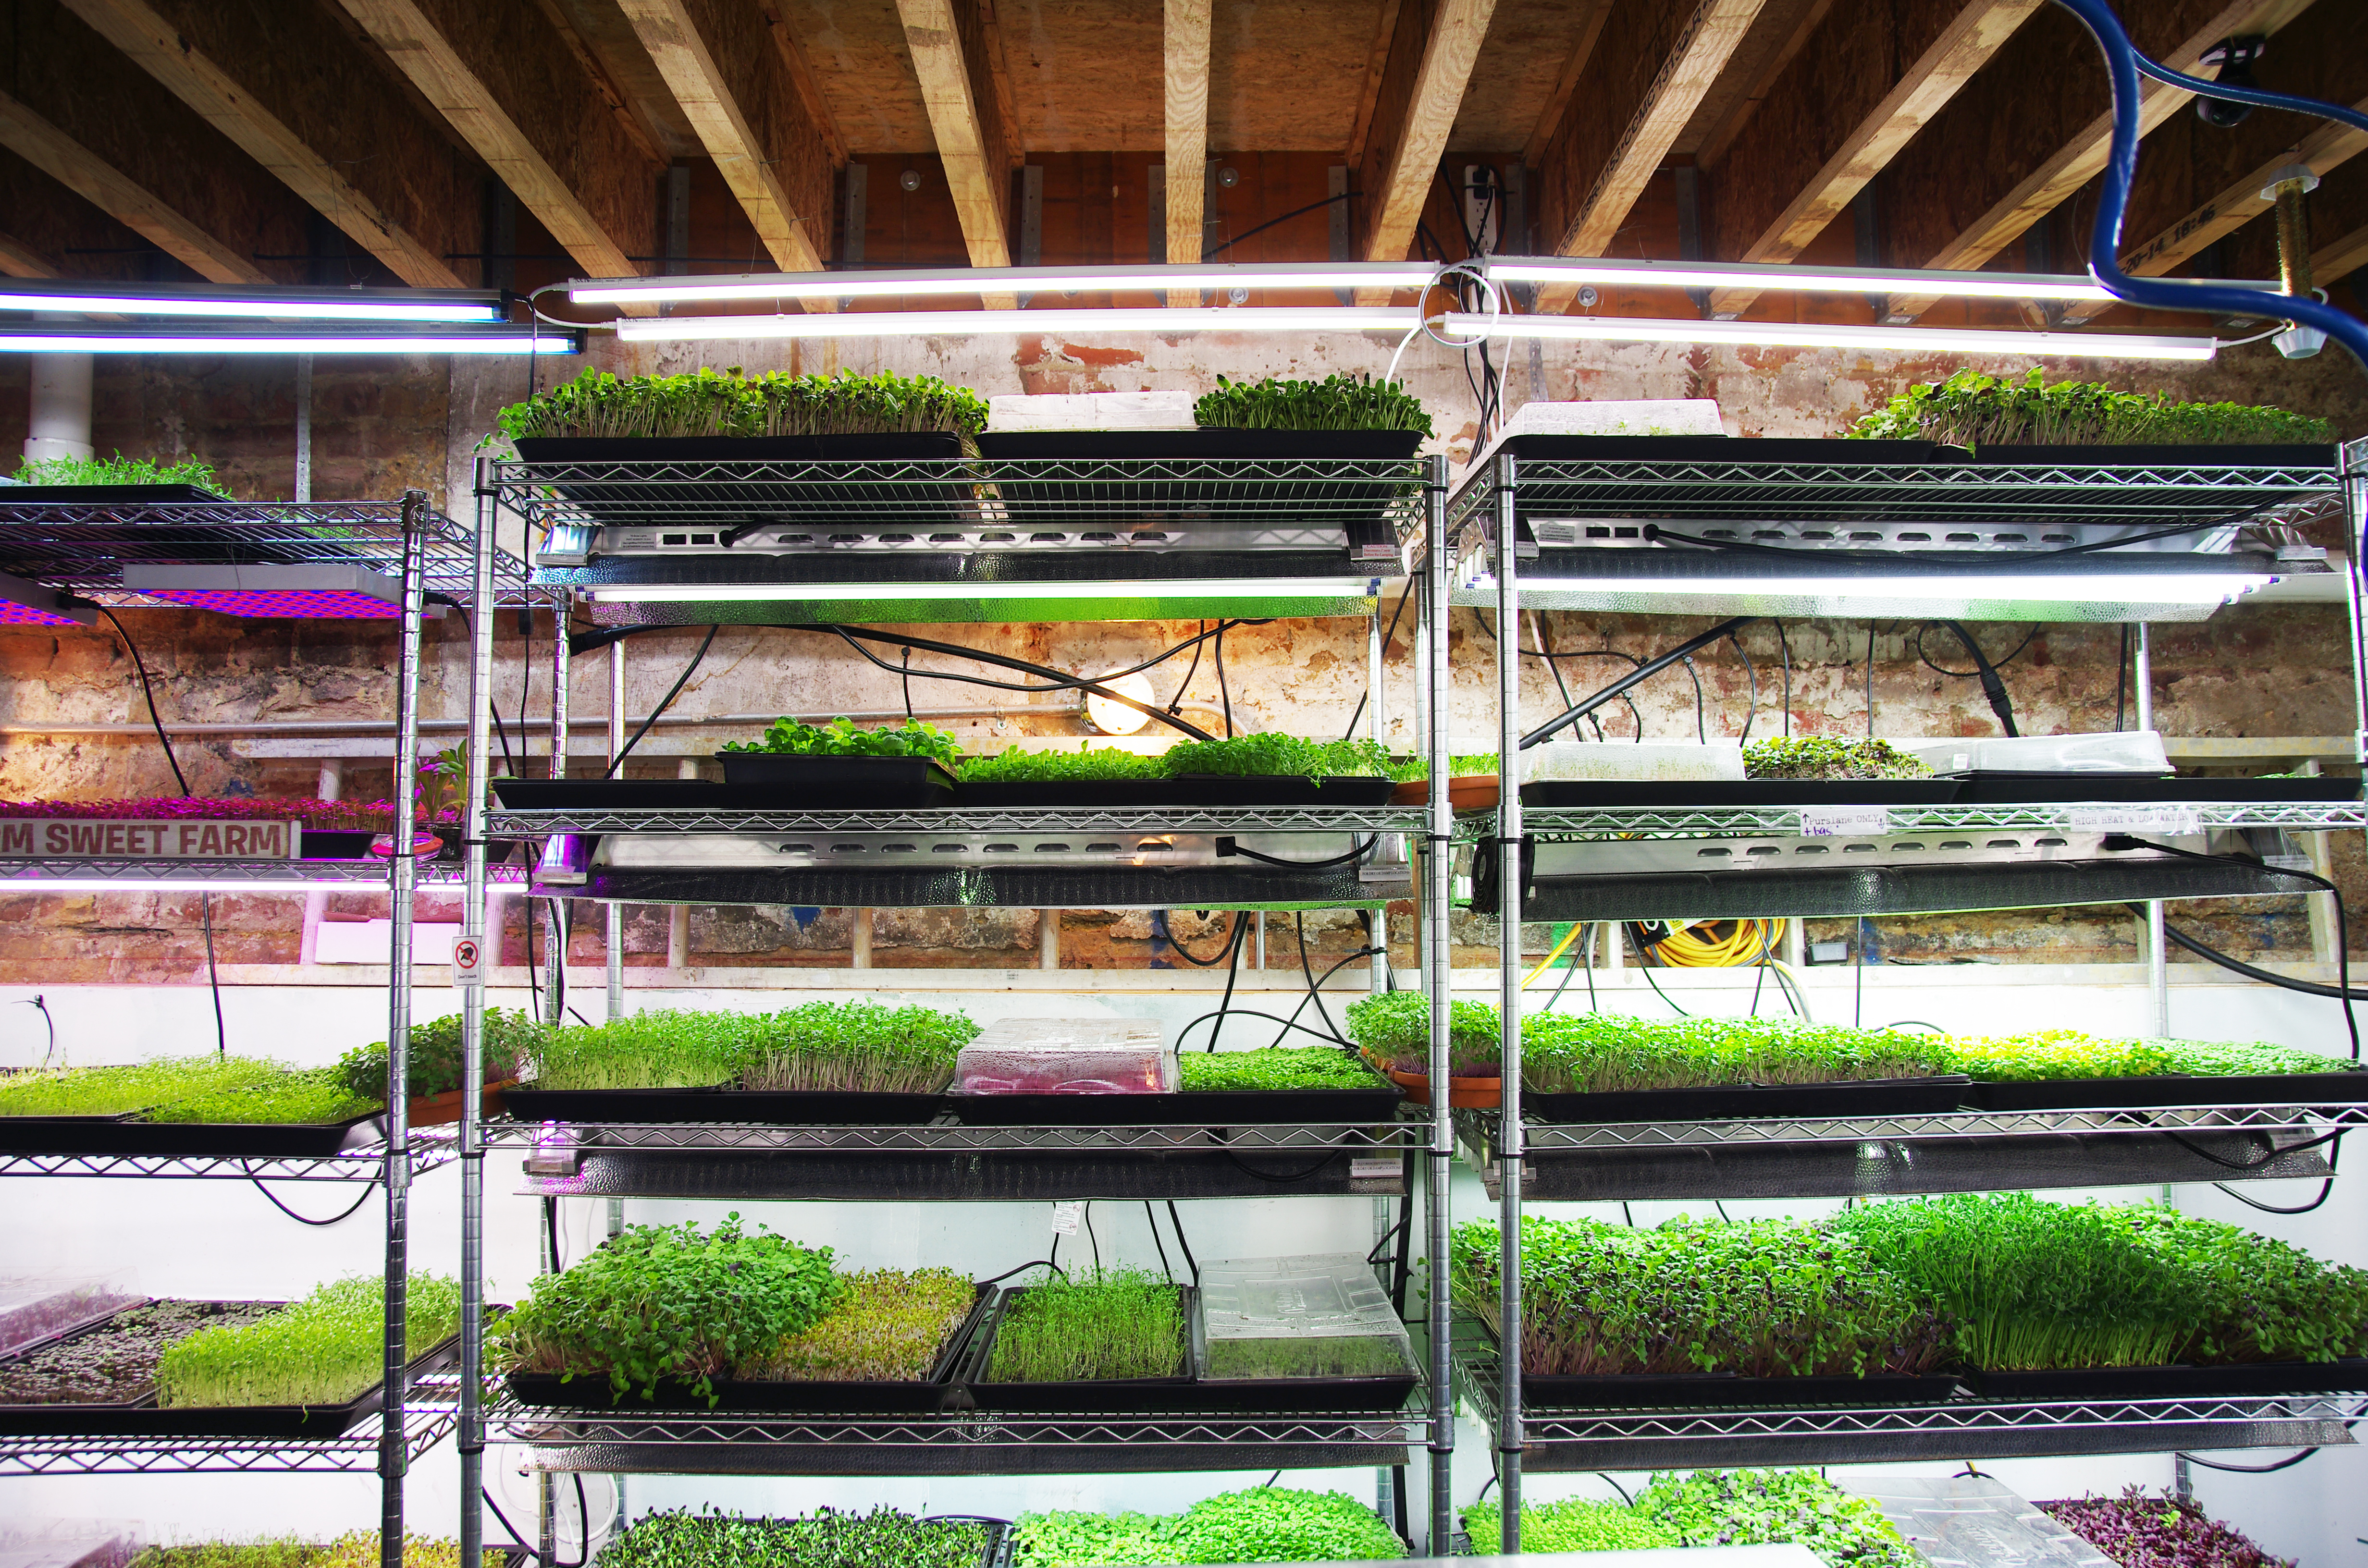 Q&A With an Urban Grower on Food Safety